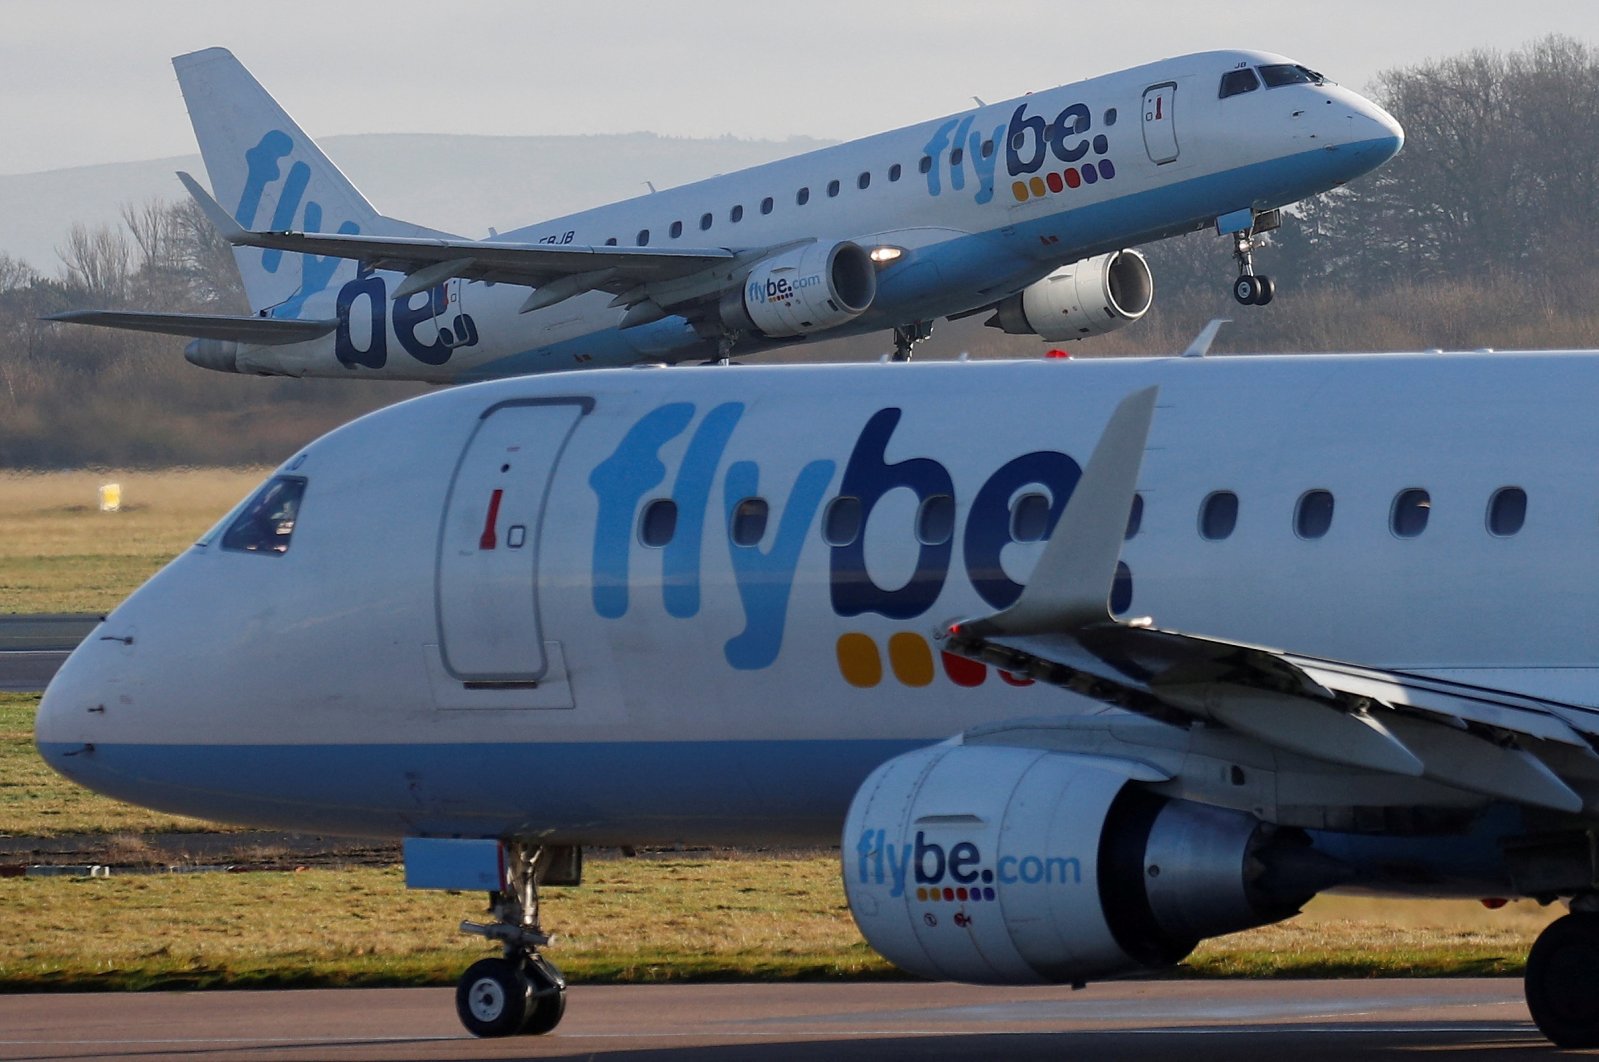 A Flybe plane takes off from Manchester Airport in Manchester, Britain, Jan. 20, 2020. (Reuters Photo)